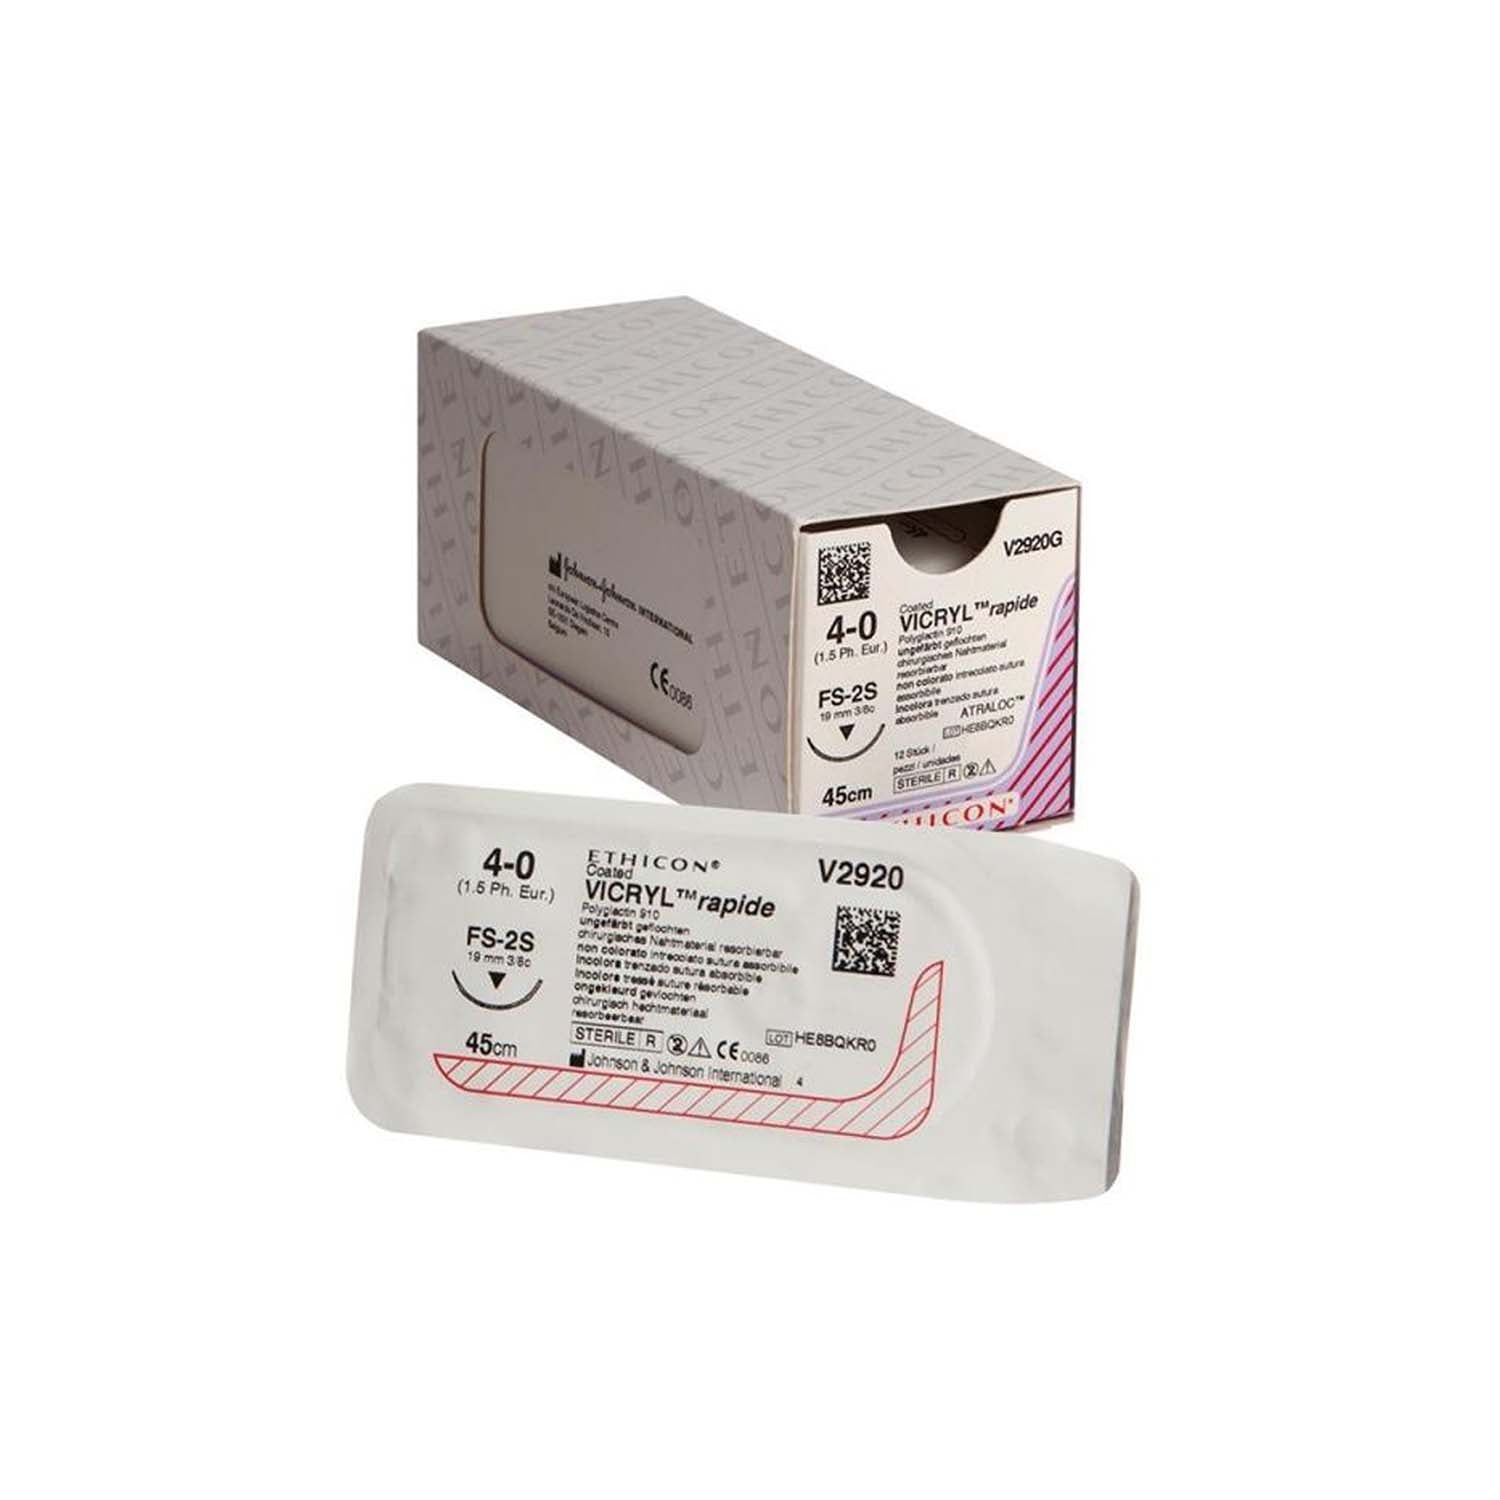 Ethicon Vicryl Rapide Suture | Absorbable | Undyed | Size: 3-0 | Length: 75cm | Needle: FS-2 | Pack of 12 (1)